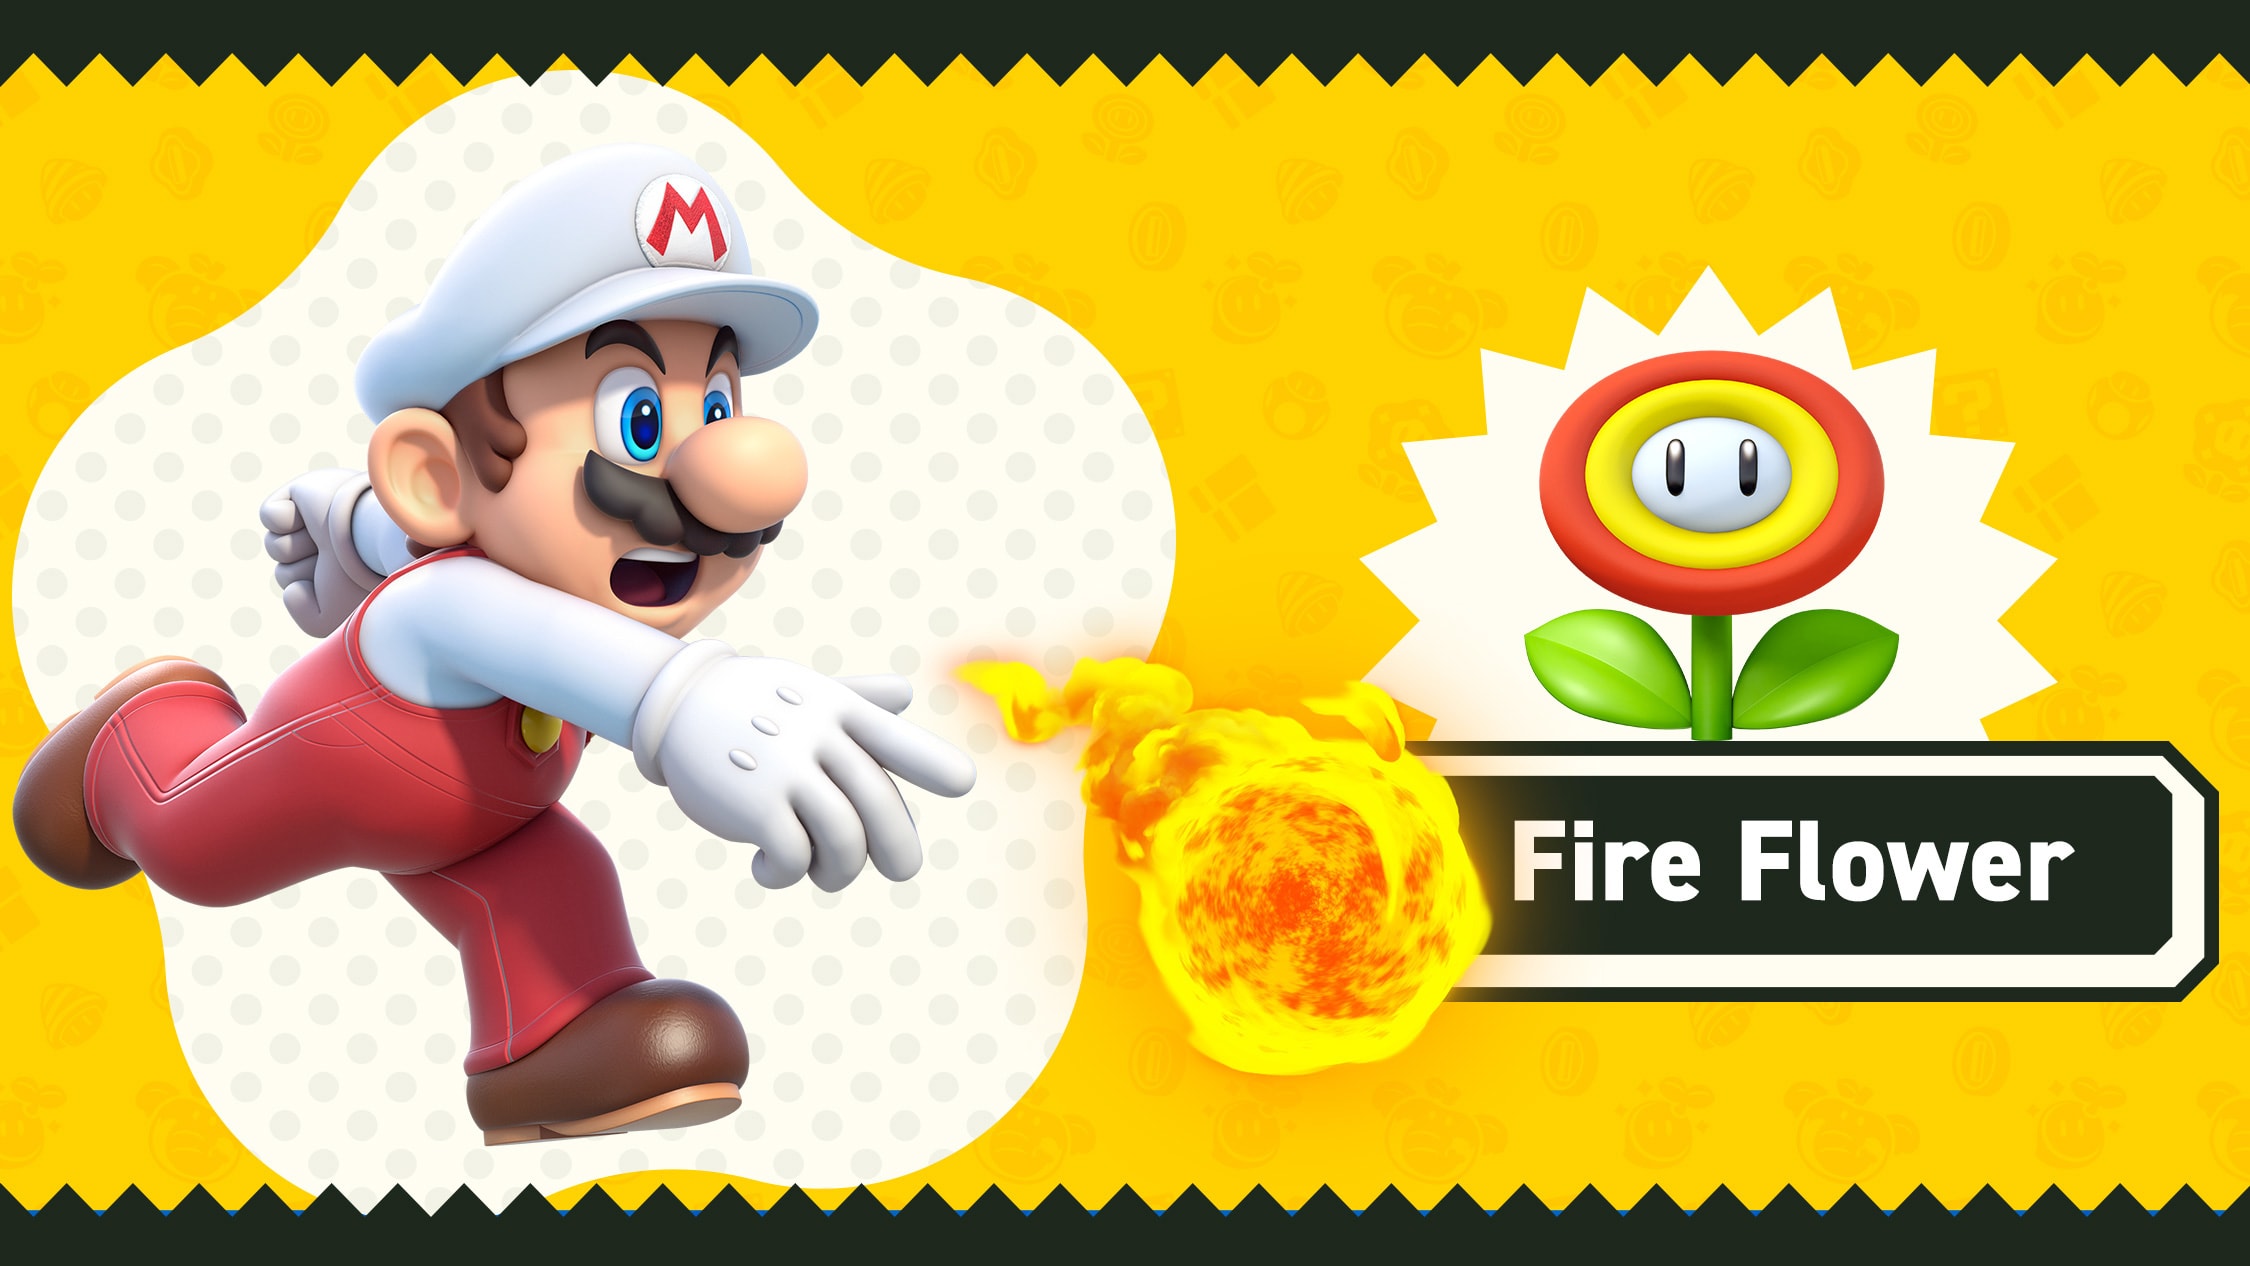 Get a jump on Super Mario Bros. Wonder with these powerful power-ups - Fire